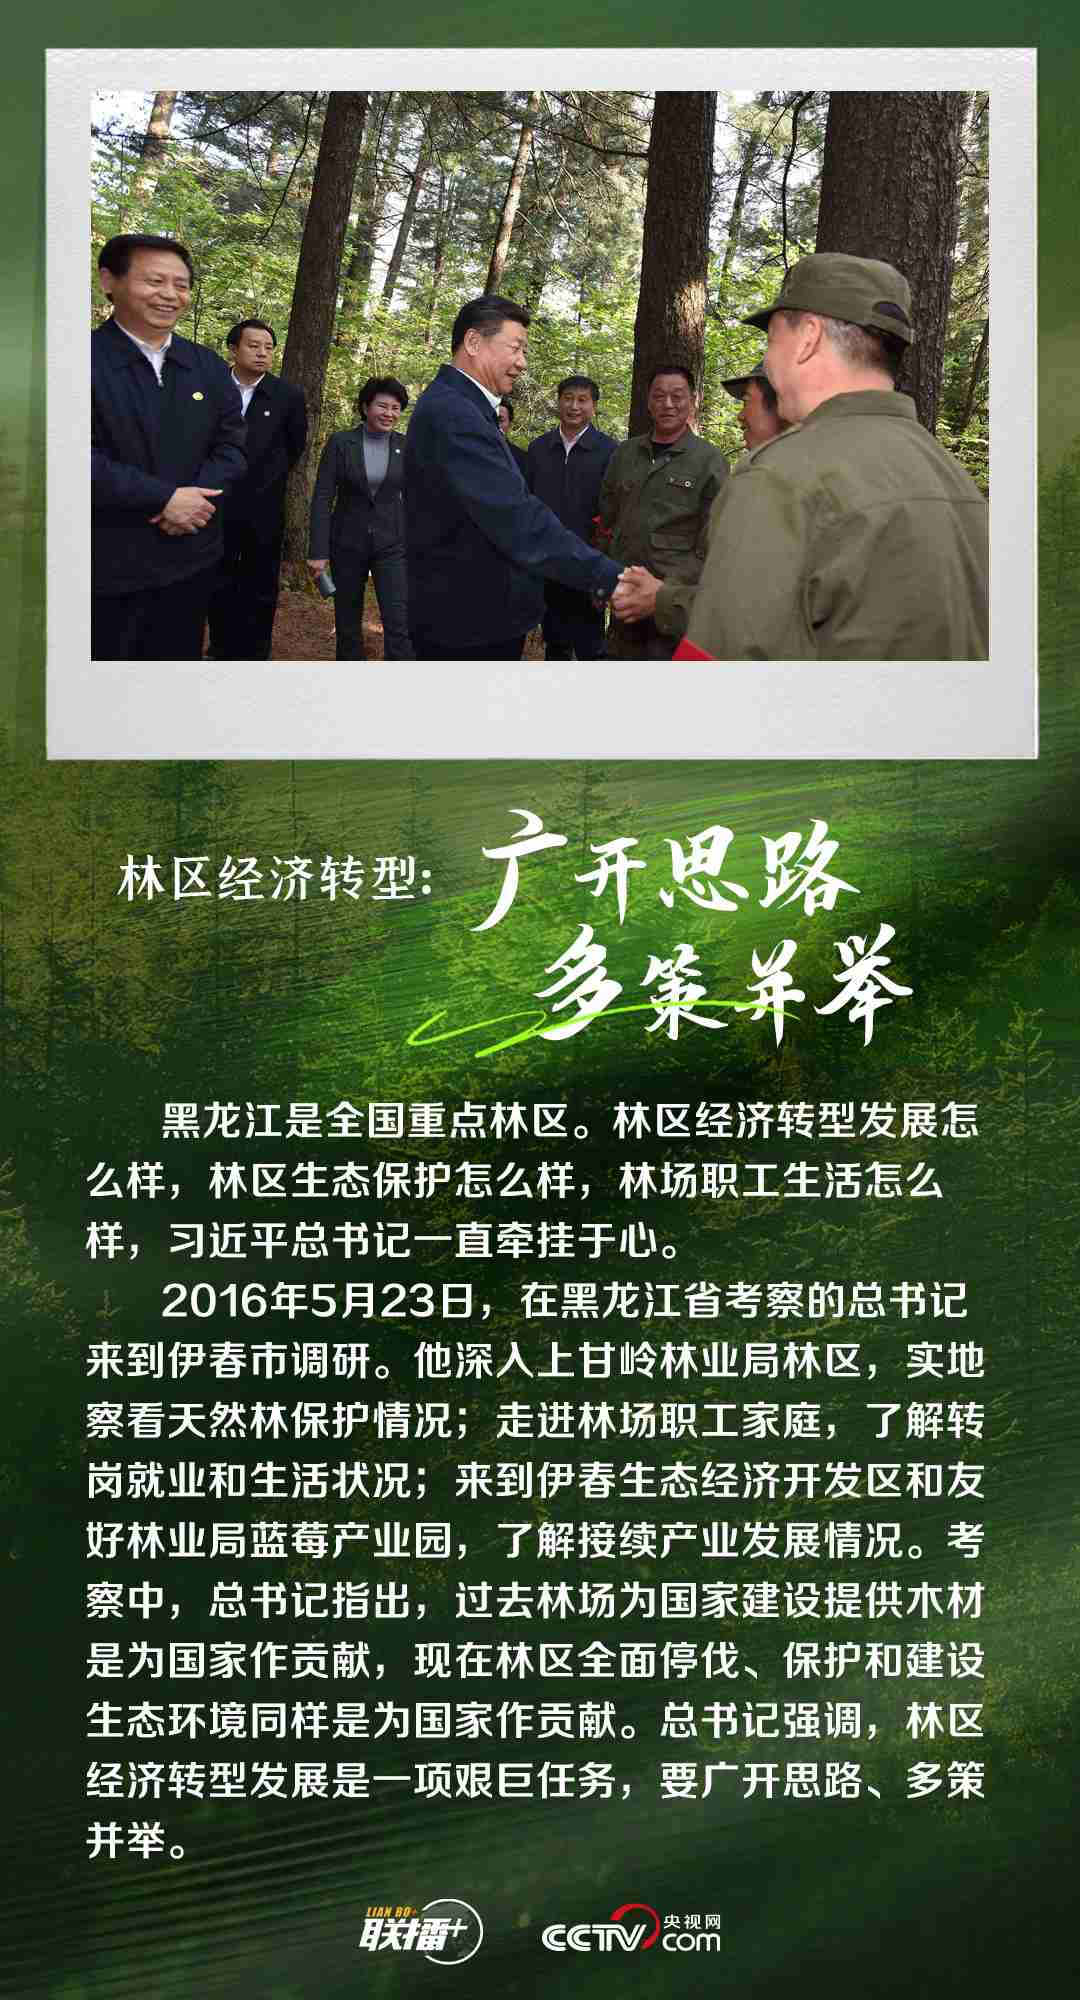 Broadcast+| General Secretary of afforestation and forest protection always cares about this green color